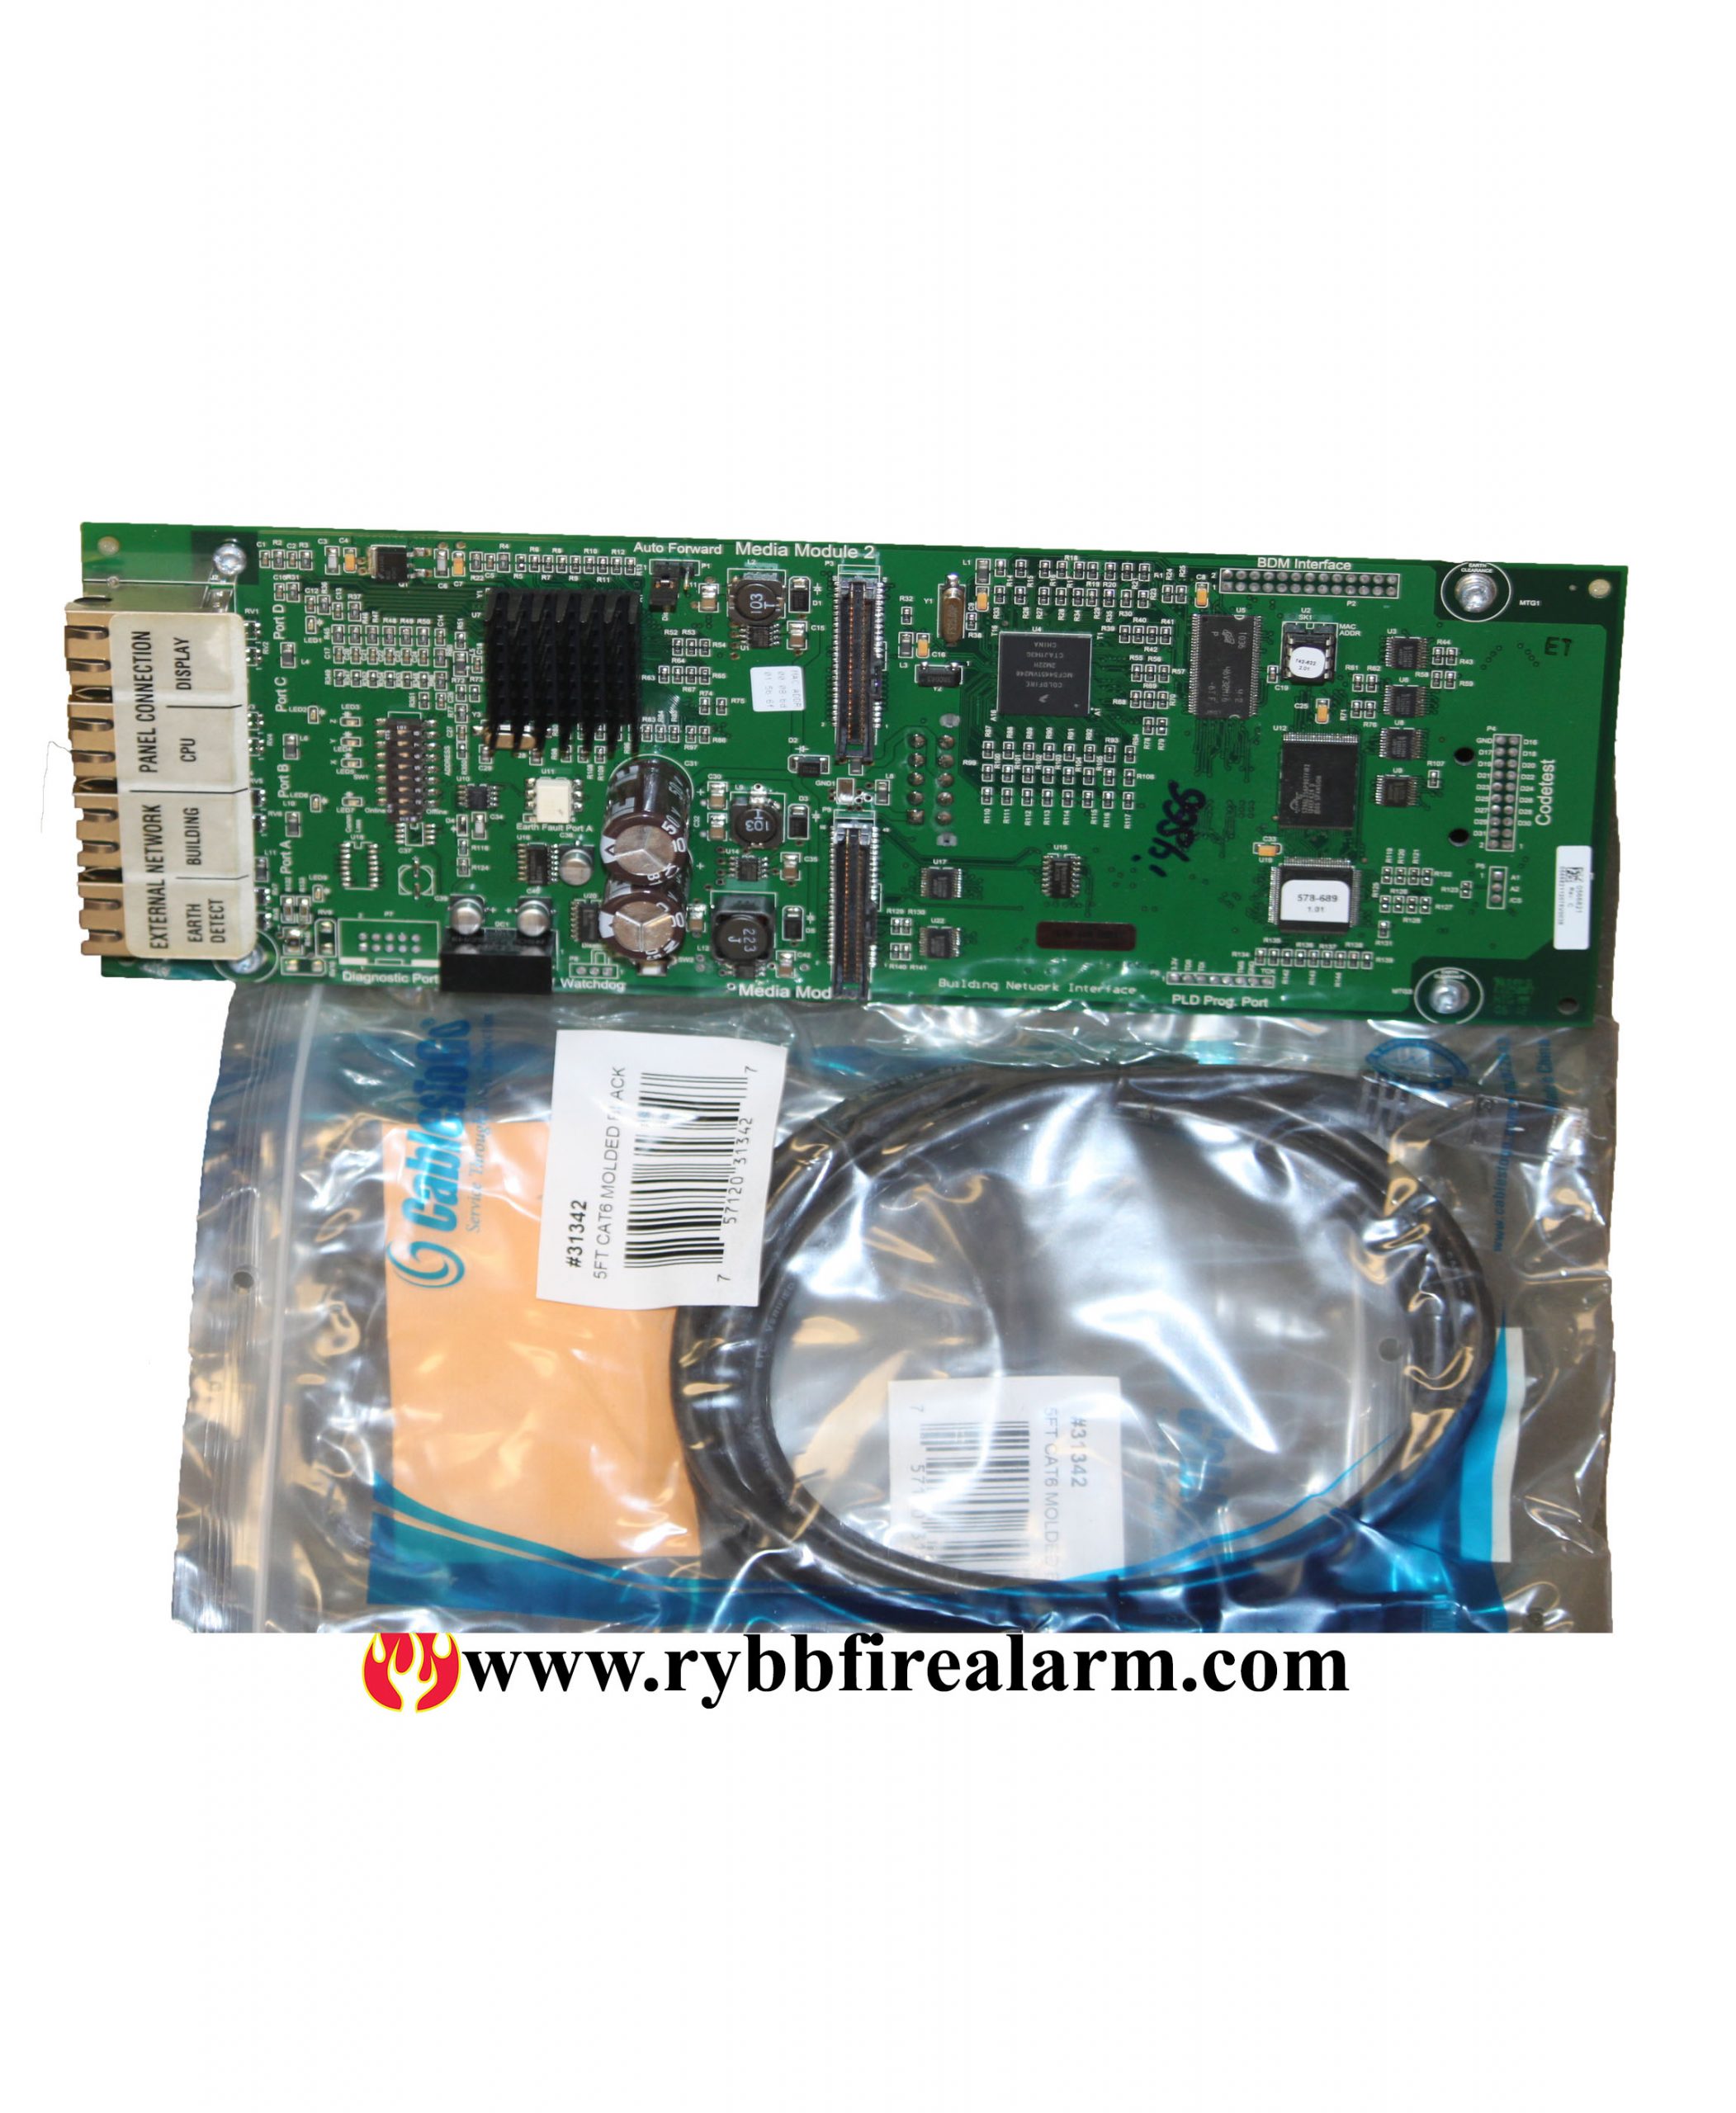 NEW SIMPLEX 4010-9821 4120 NETWORK CARD RS485 